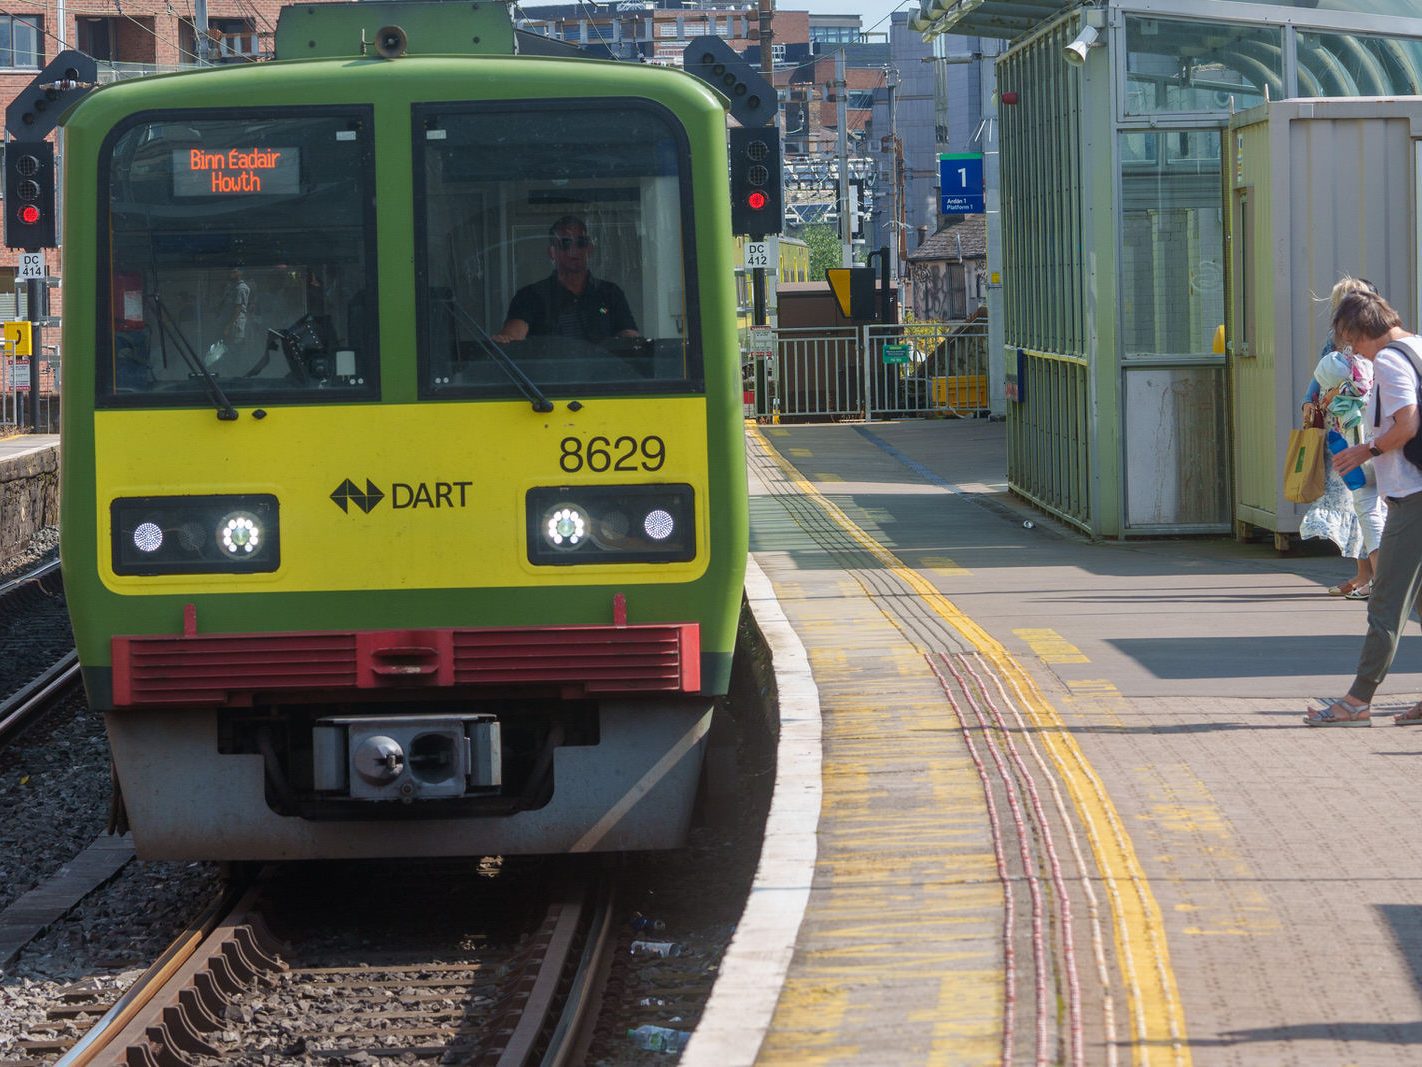 DART TRAINS COMING AND GOING WHILE THE RUGBY FANS ARREAR TO BE CONFUSED [TARA STREET STATION IN DUBLIN] 013